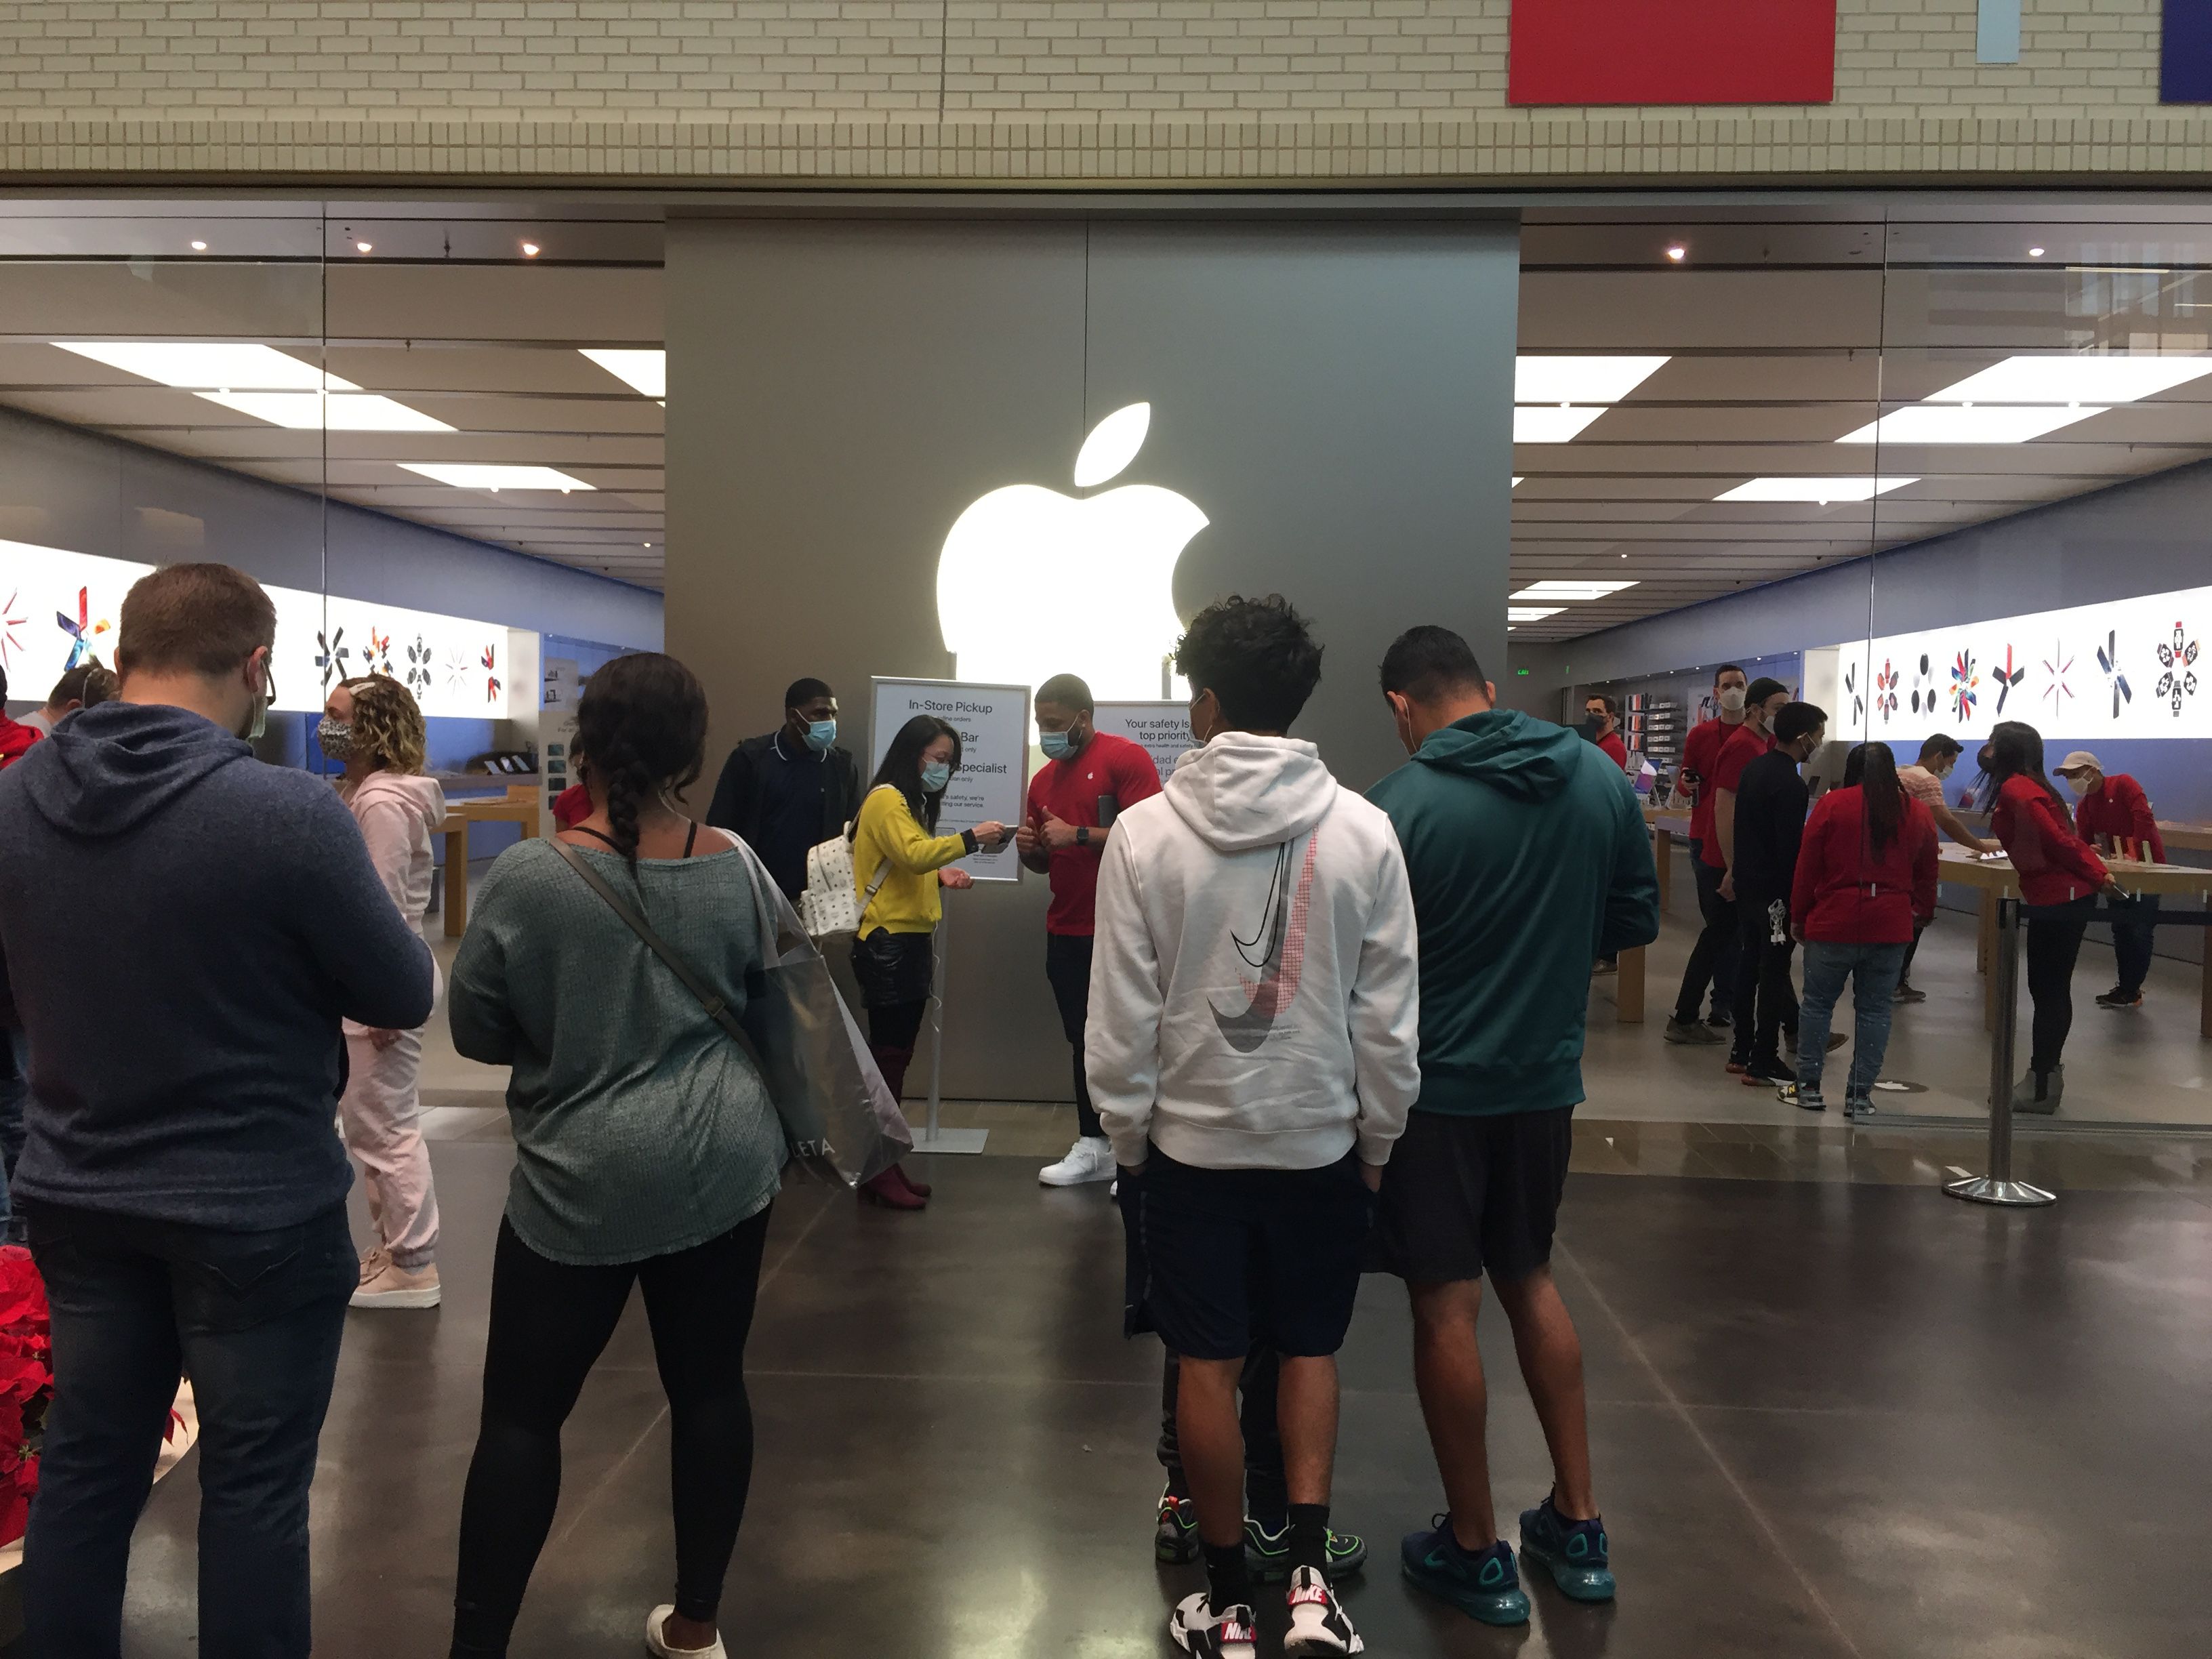 Apple's Southlake, Texas store set to close on March 4th in